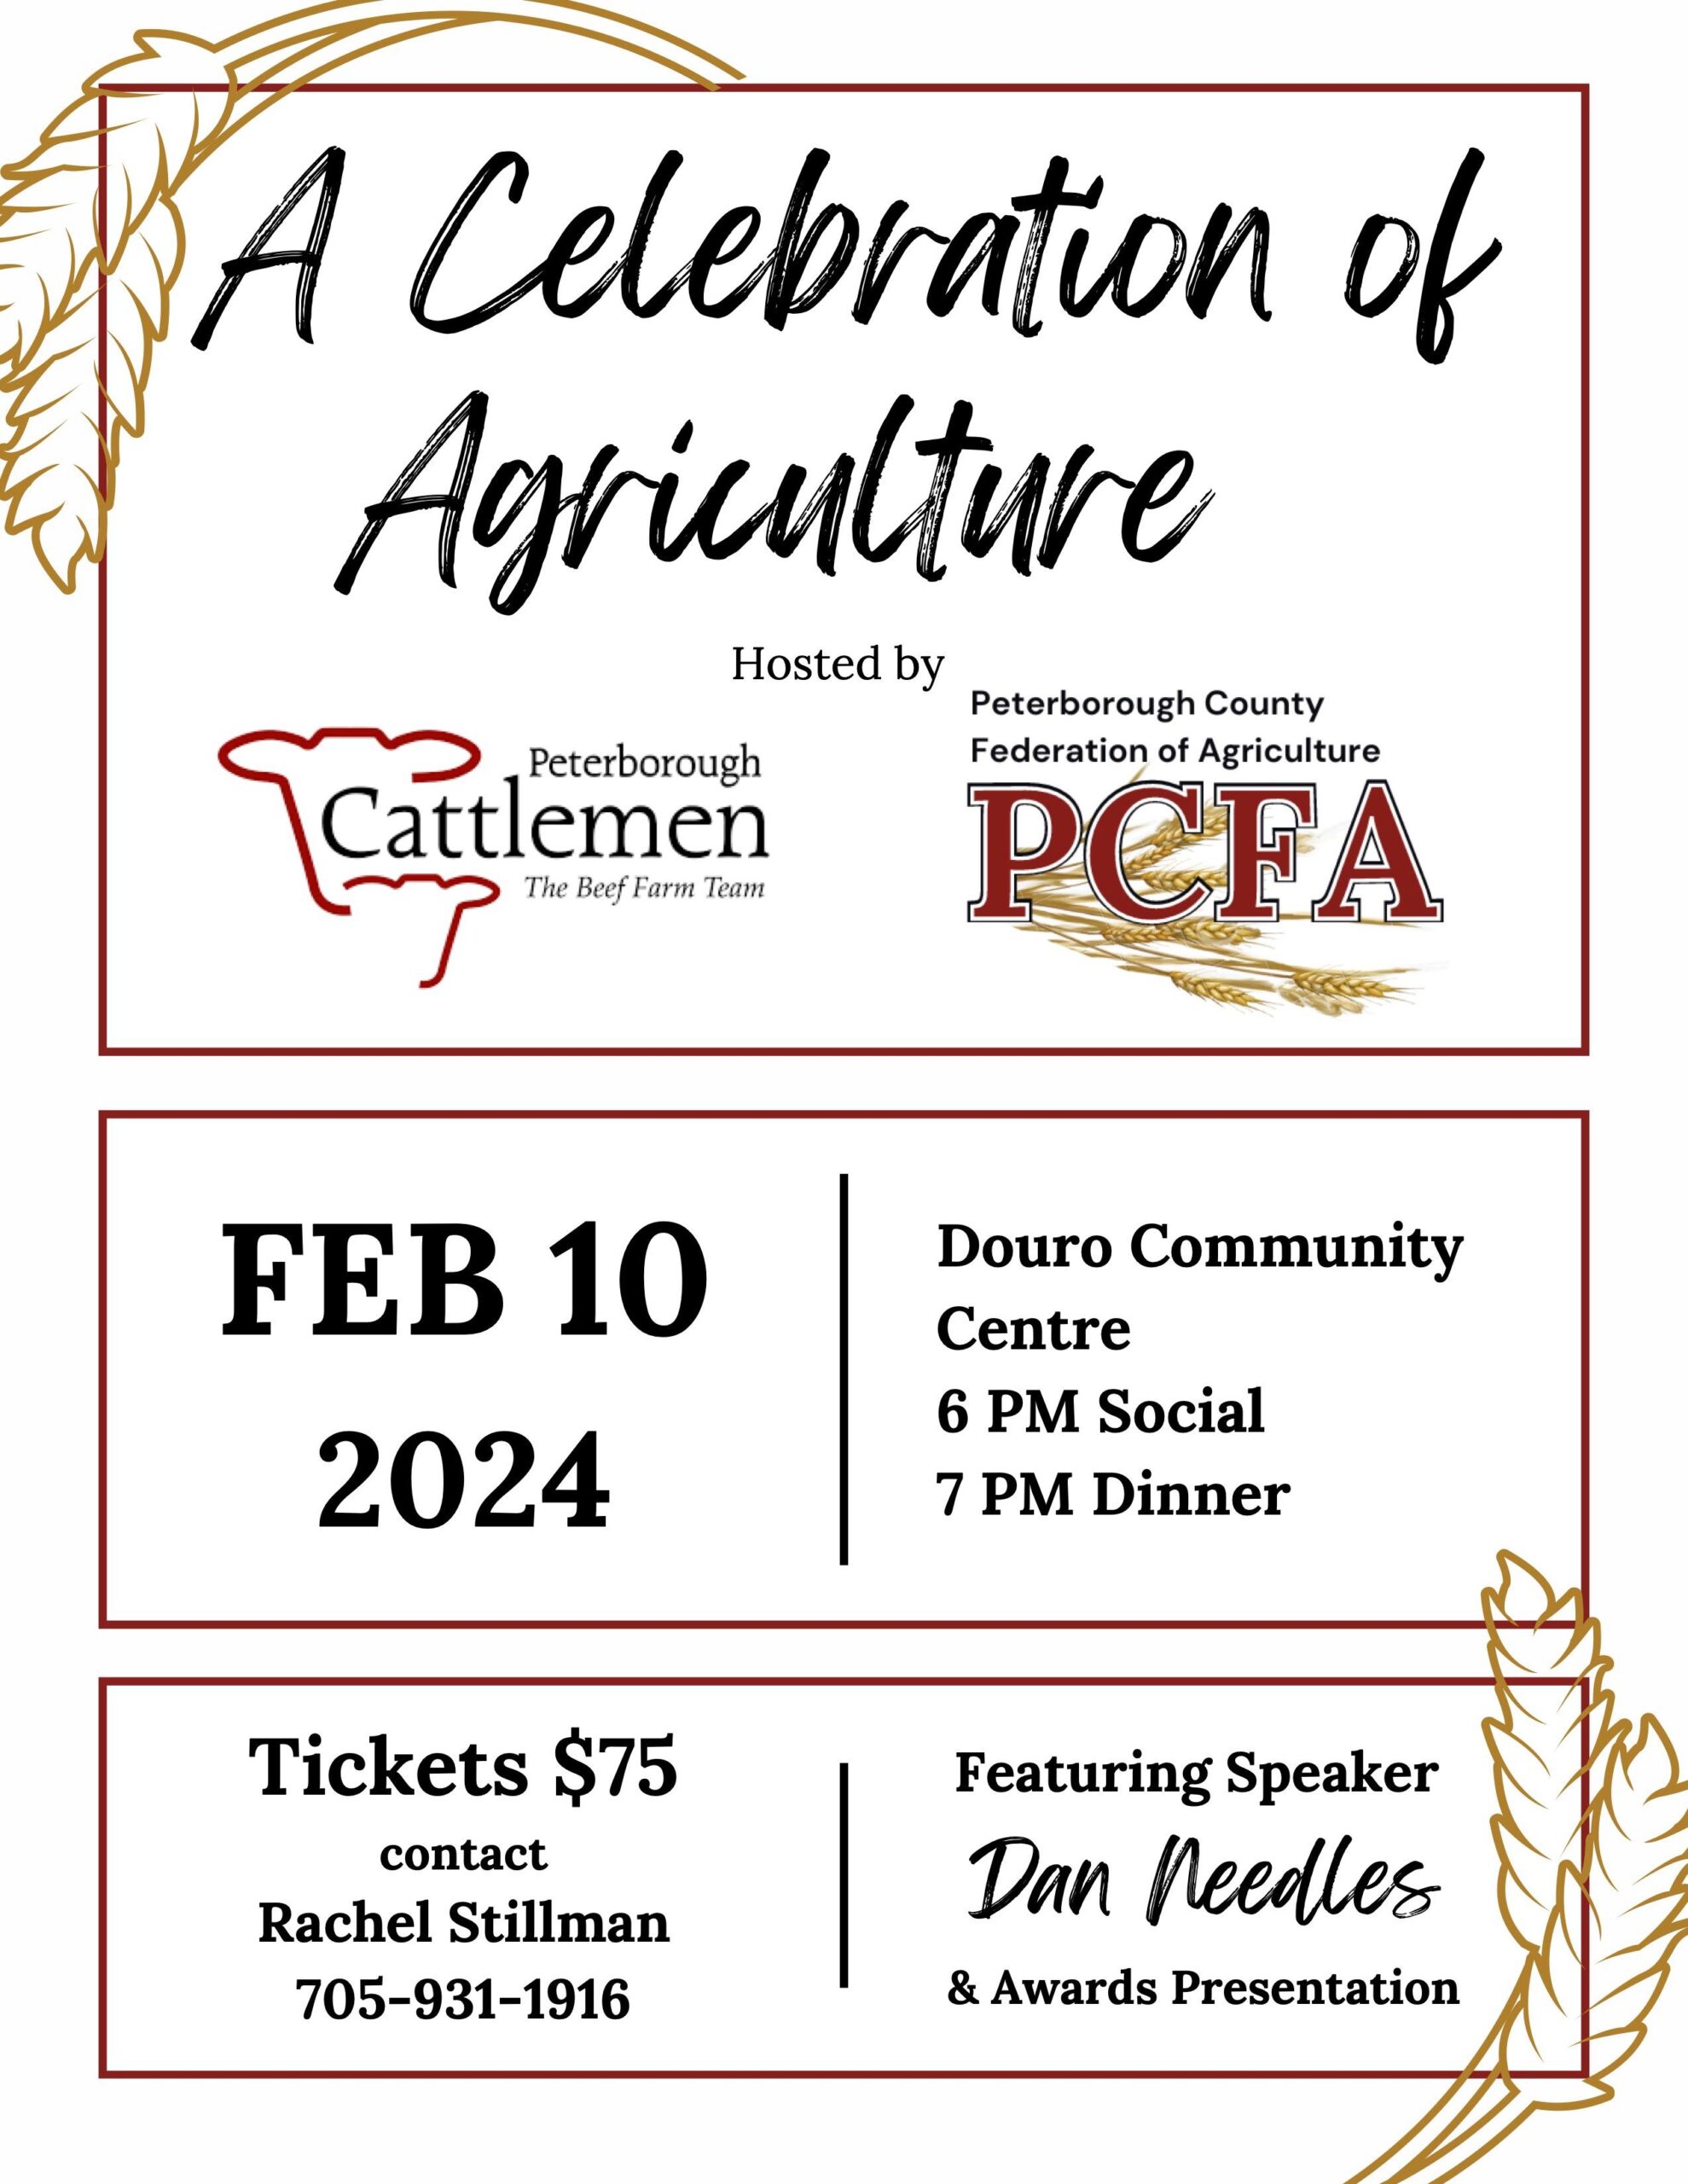 A Celebration of Agriculture in Peterborough County